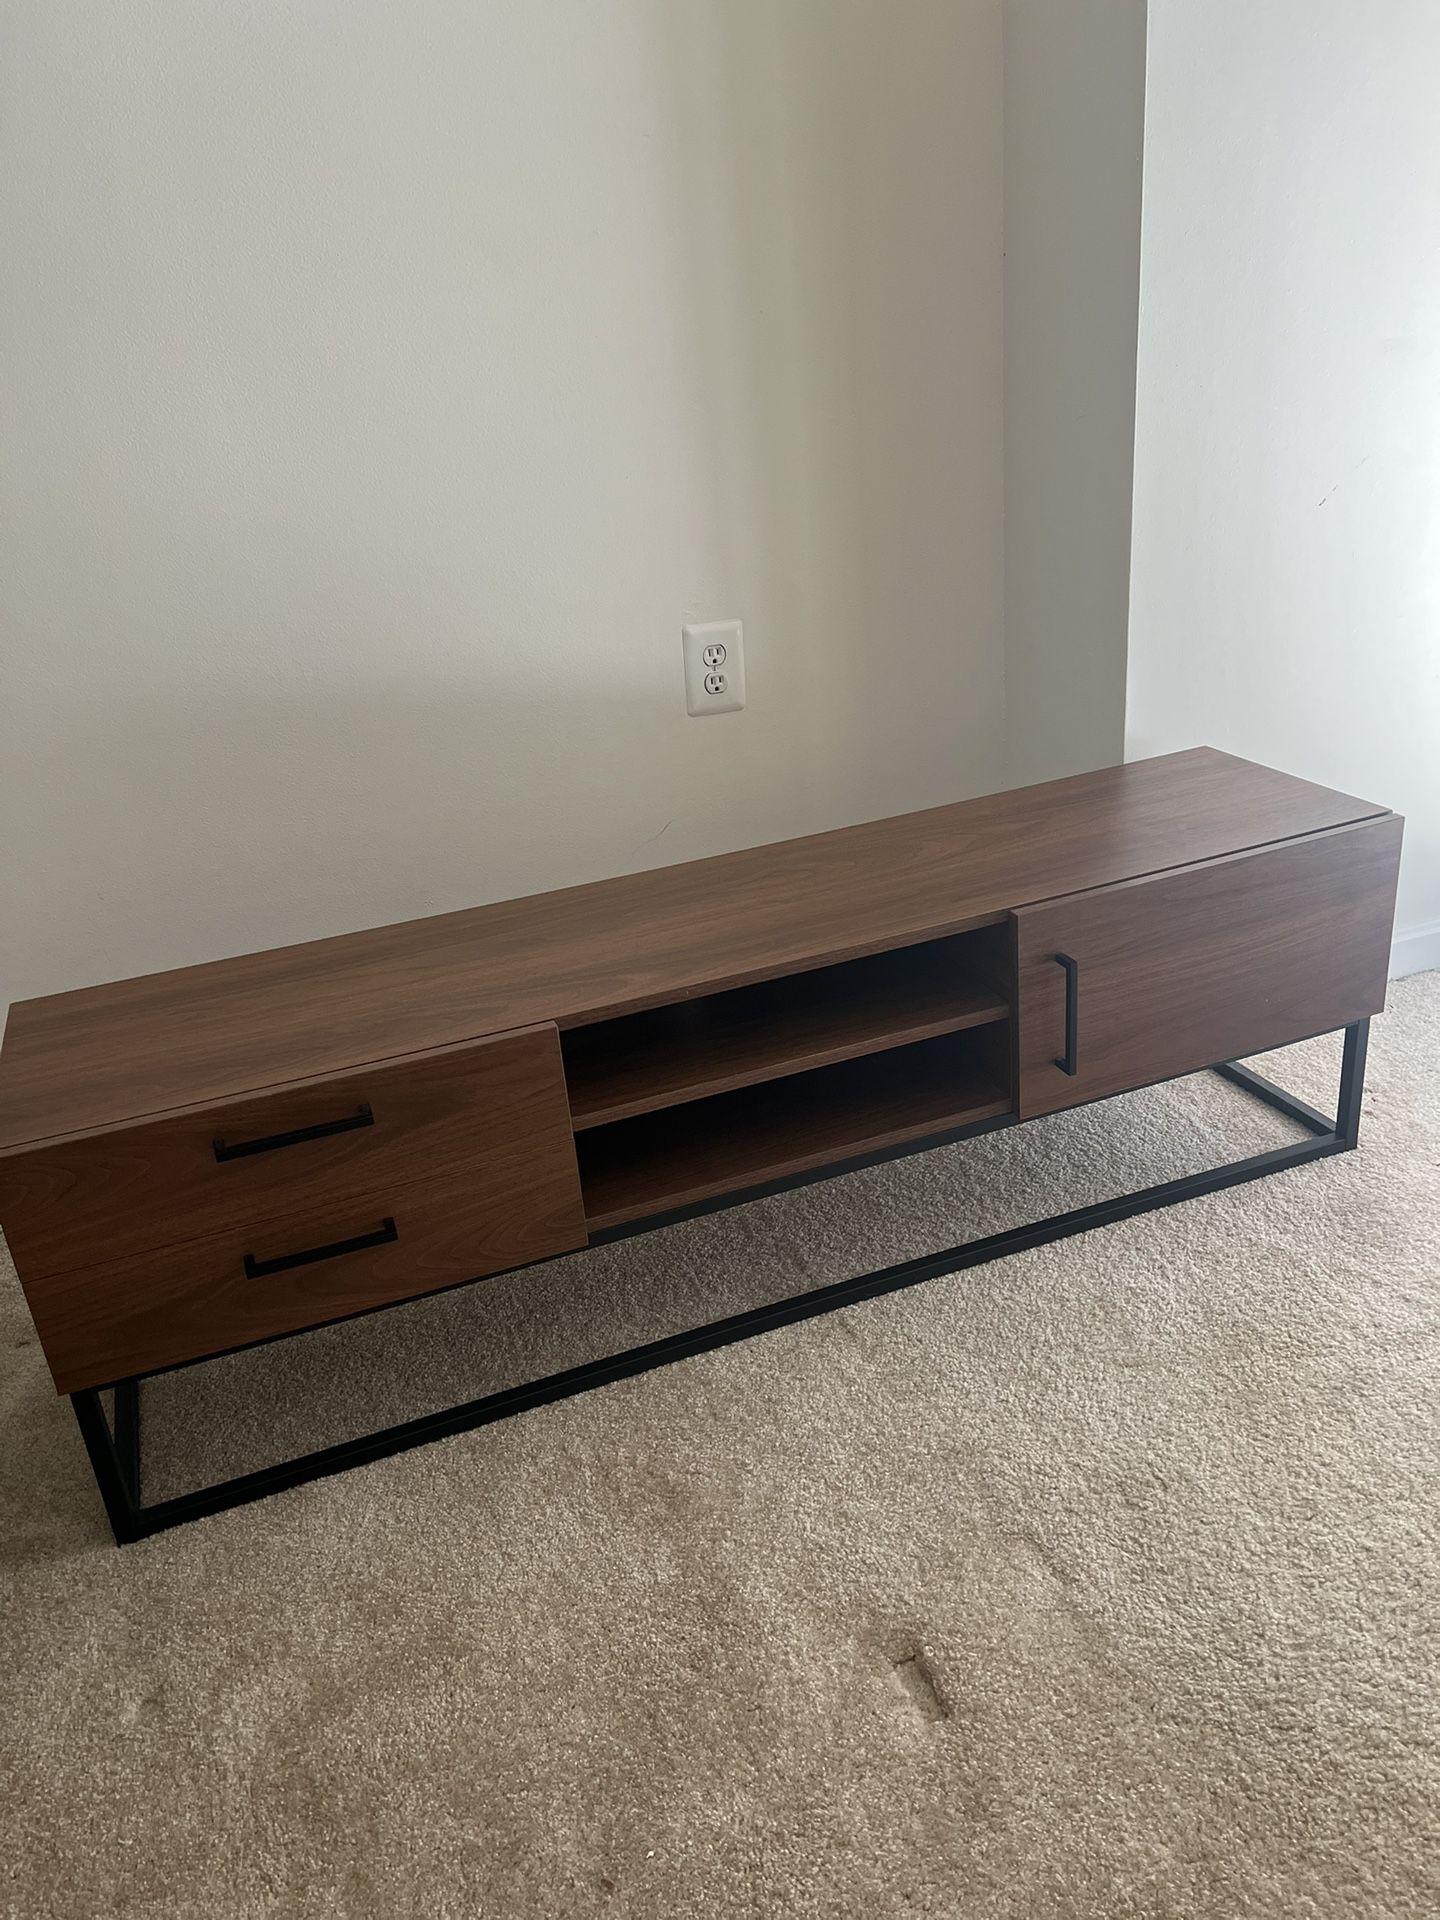 Modern TV Stand Living Room Gaming Storage Furniture with Drawers Cabinet Space Wood & Metal Console